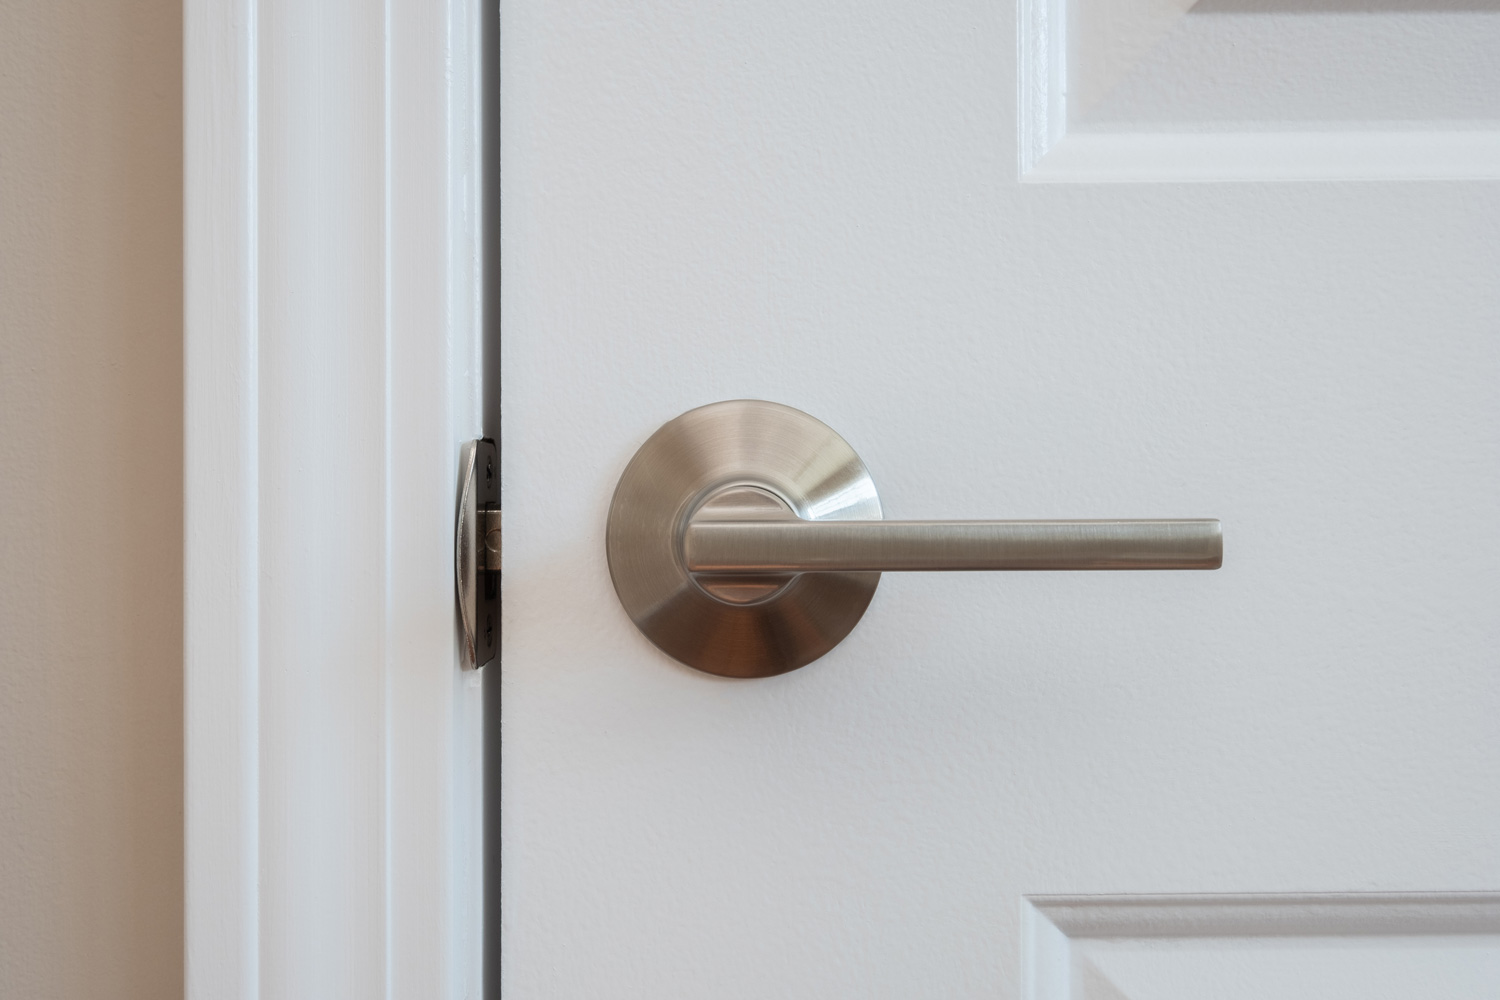 Photograph of a modern styled nickel closet door lever